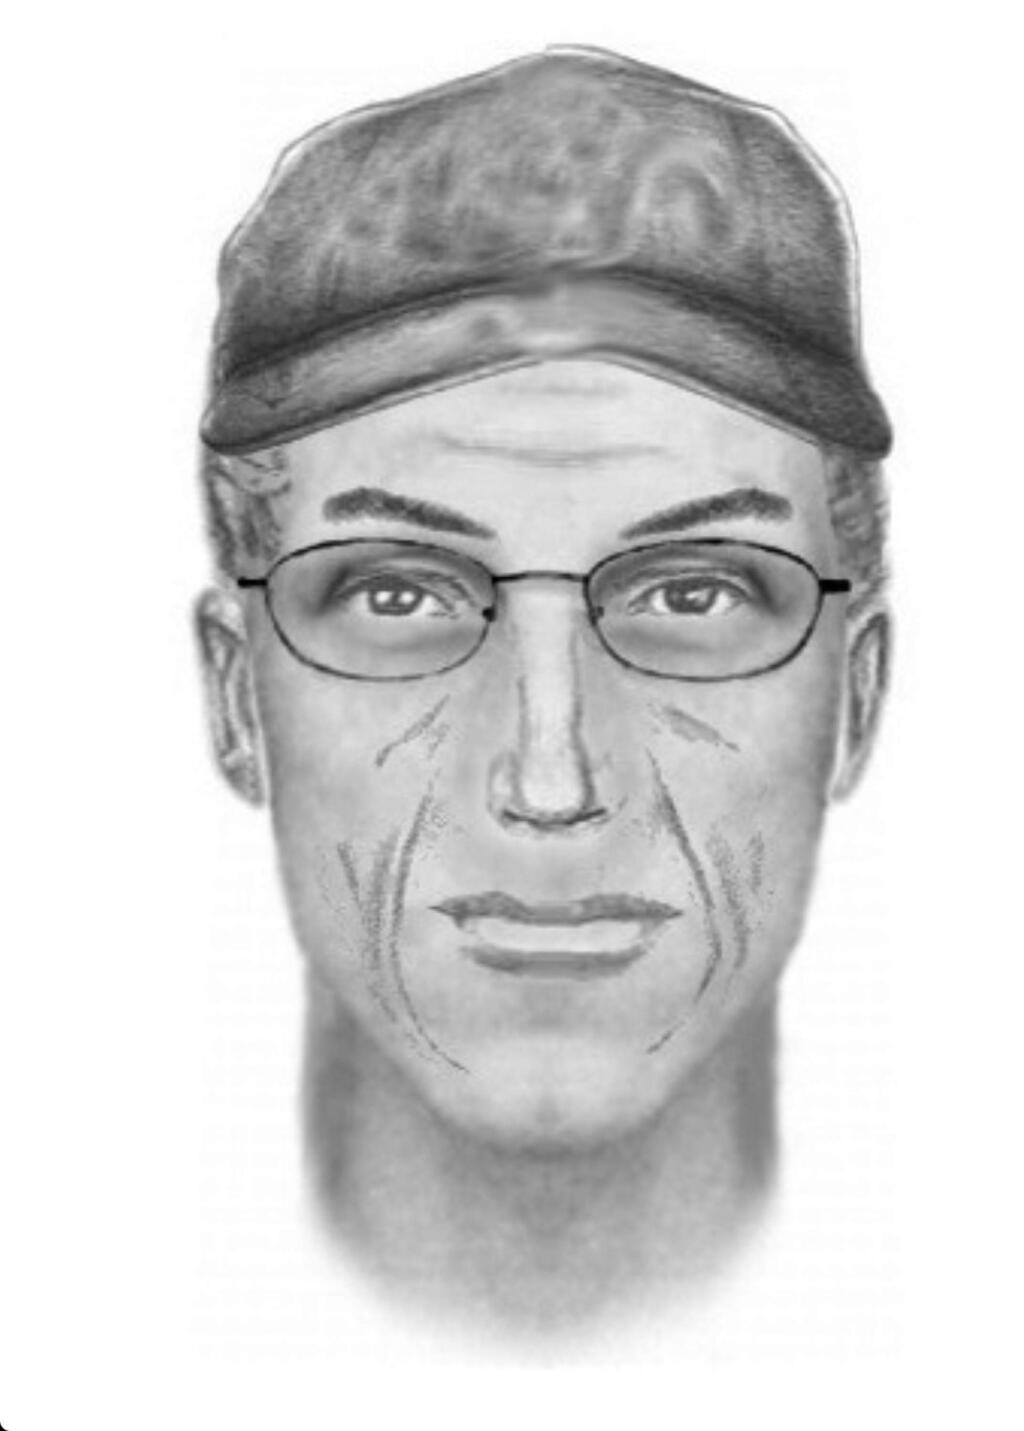 This undated composite sketch provided by the Kern County Sheriff's Office shows the suspect involved in the wounding of police officers in the Kelso Valley, Calif., area on Tuesday, July 28, 2015. Authorities on Monday, Aug. 3, searched an area east of Bakersfield, Calif., as part of a six-day manhunt involving the wounding of the deputies. (Kern County Sheriff's Office via AP)